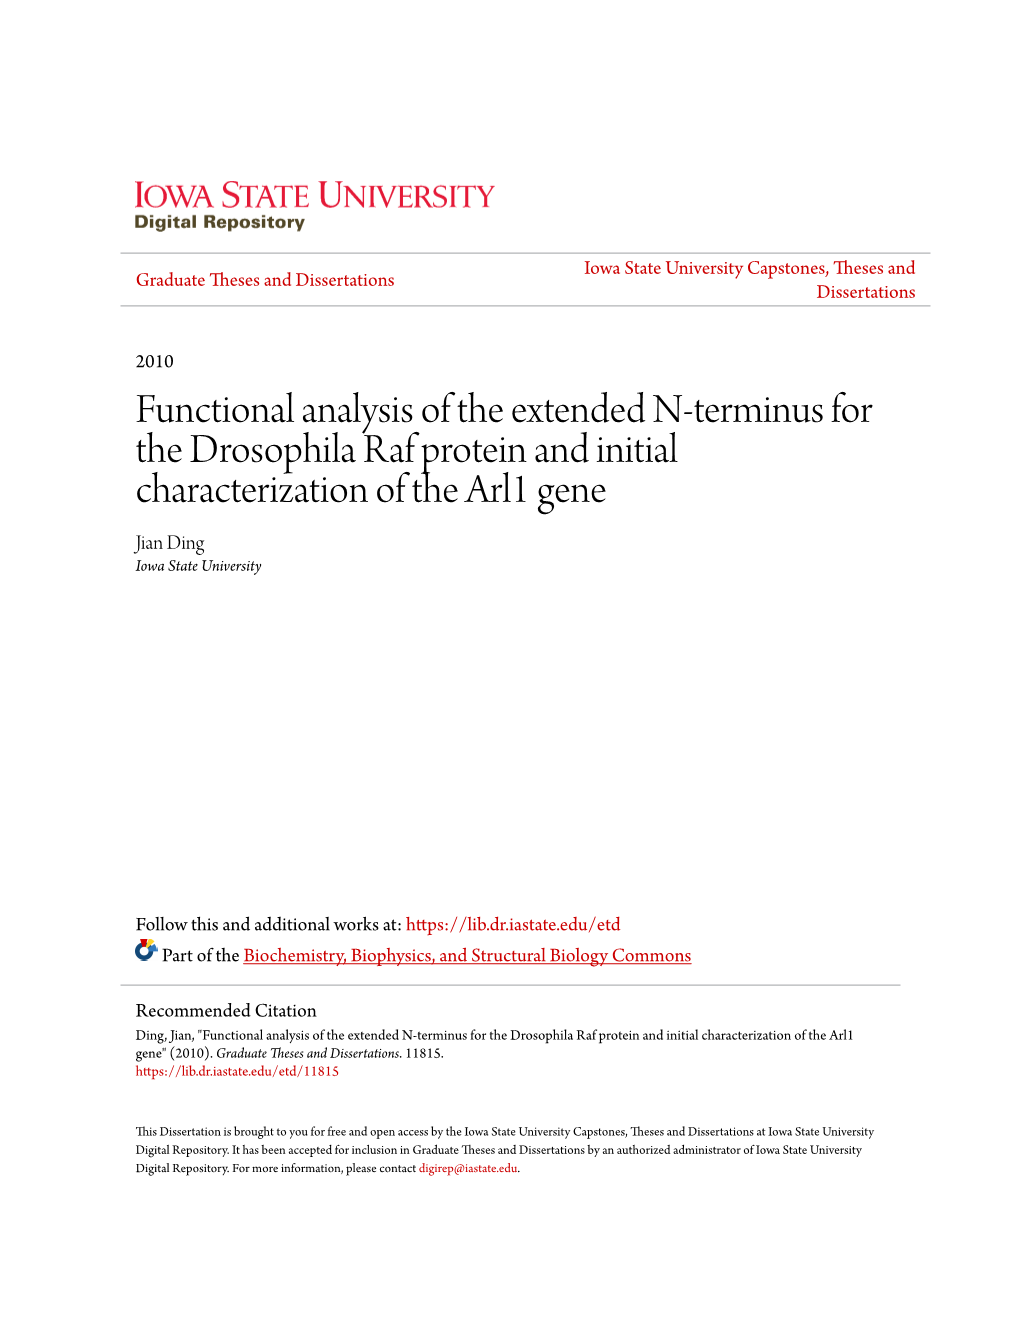 Functional Analysis of the Extended N-Terminus for the Drosophila Raf Protein and Initial Characterization of the Arl1 Gene Jian Ding Iowa State University